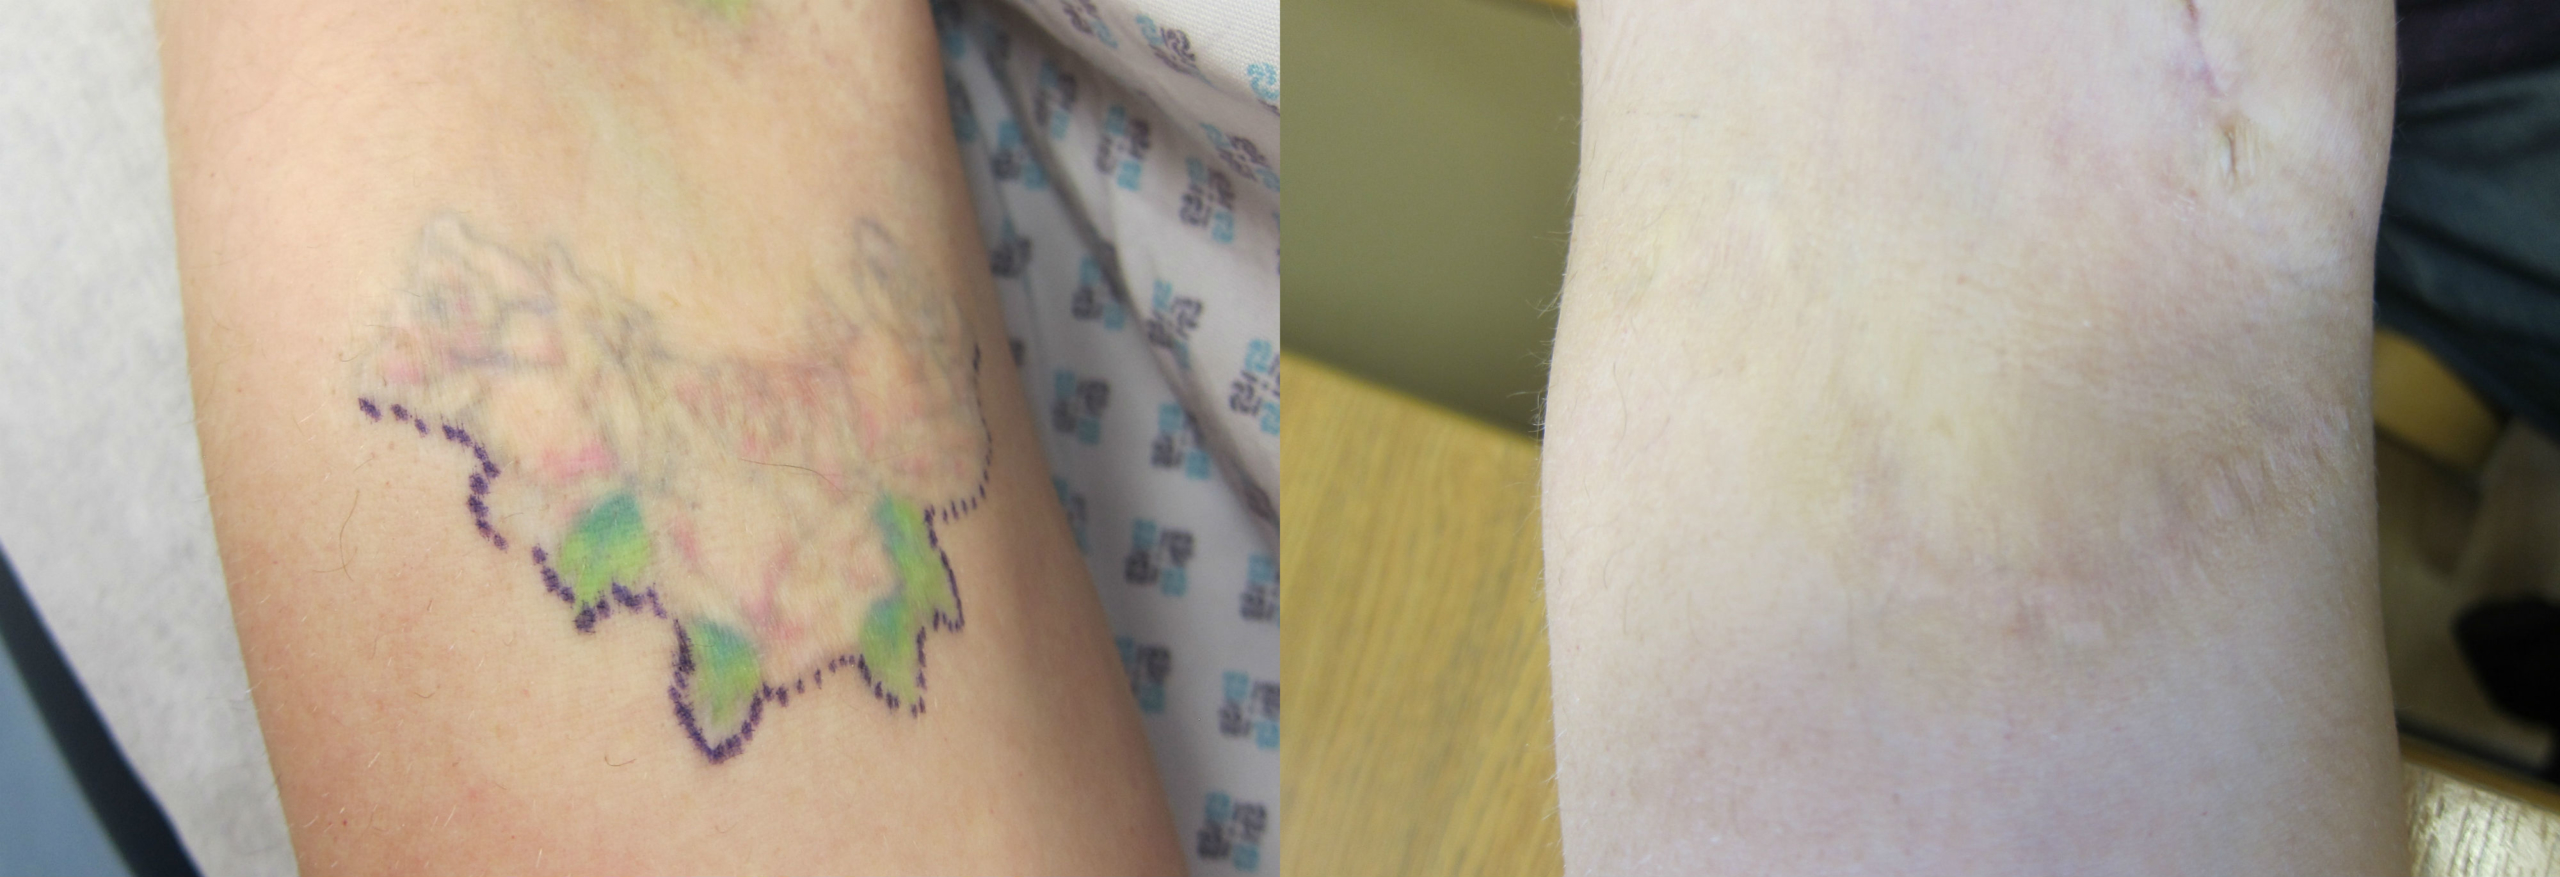 Tattoo Removal - Birmingham - Staiano Plastic Surgery